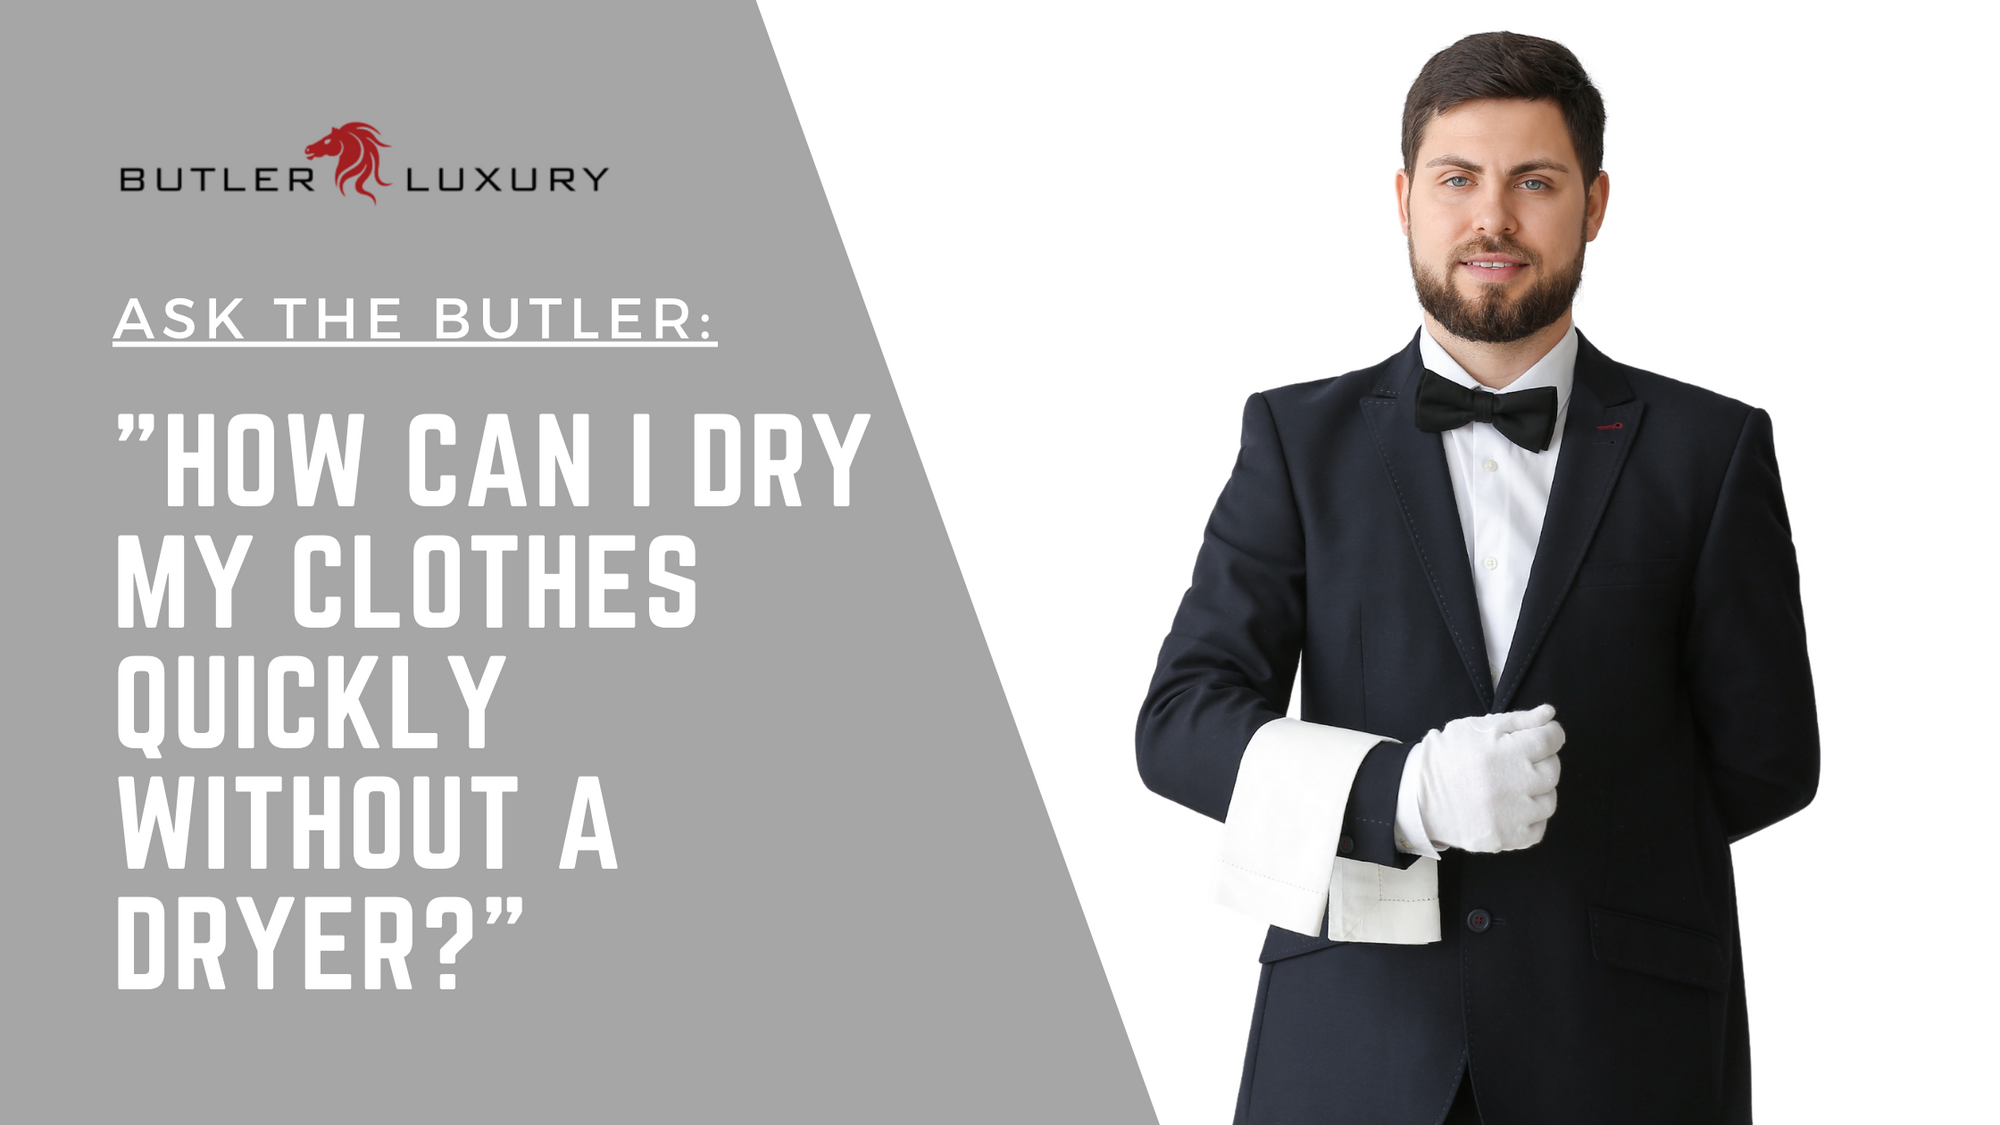 Ask the Butler: How Can I Dry My Clothes Quickly Without a Dryer?